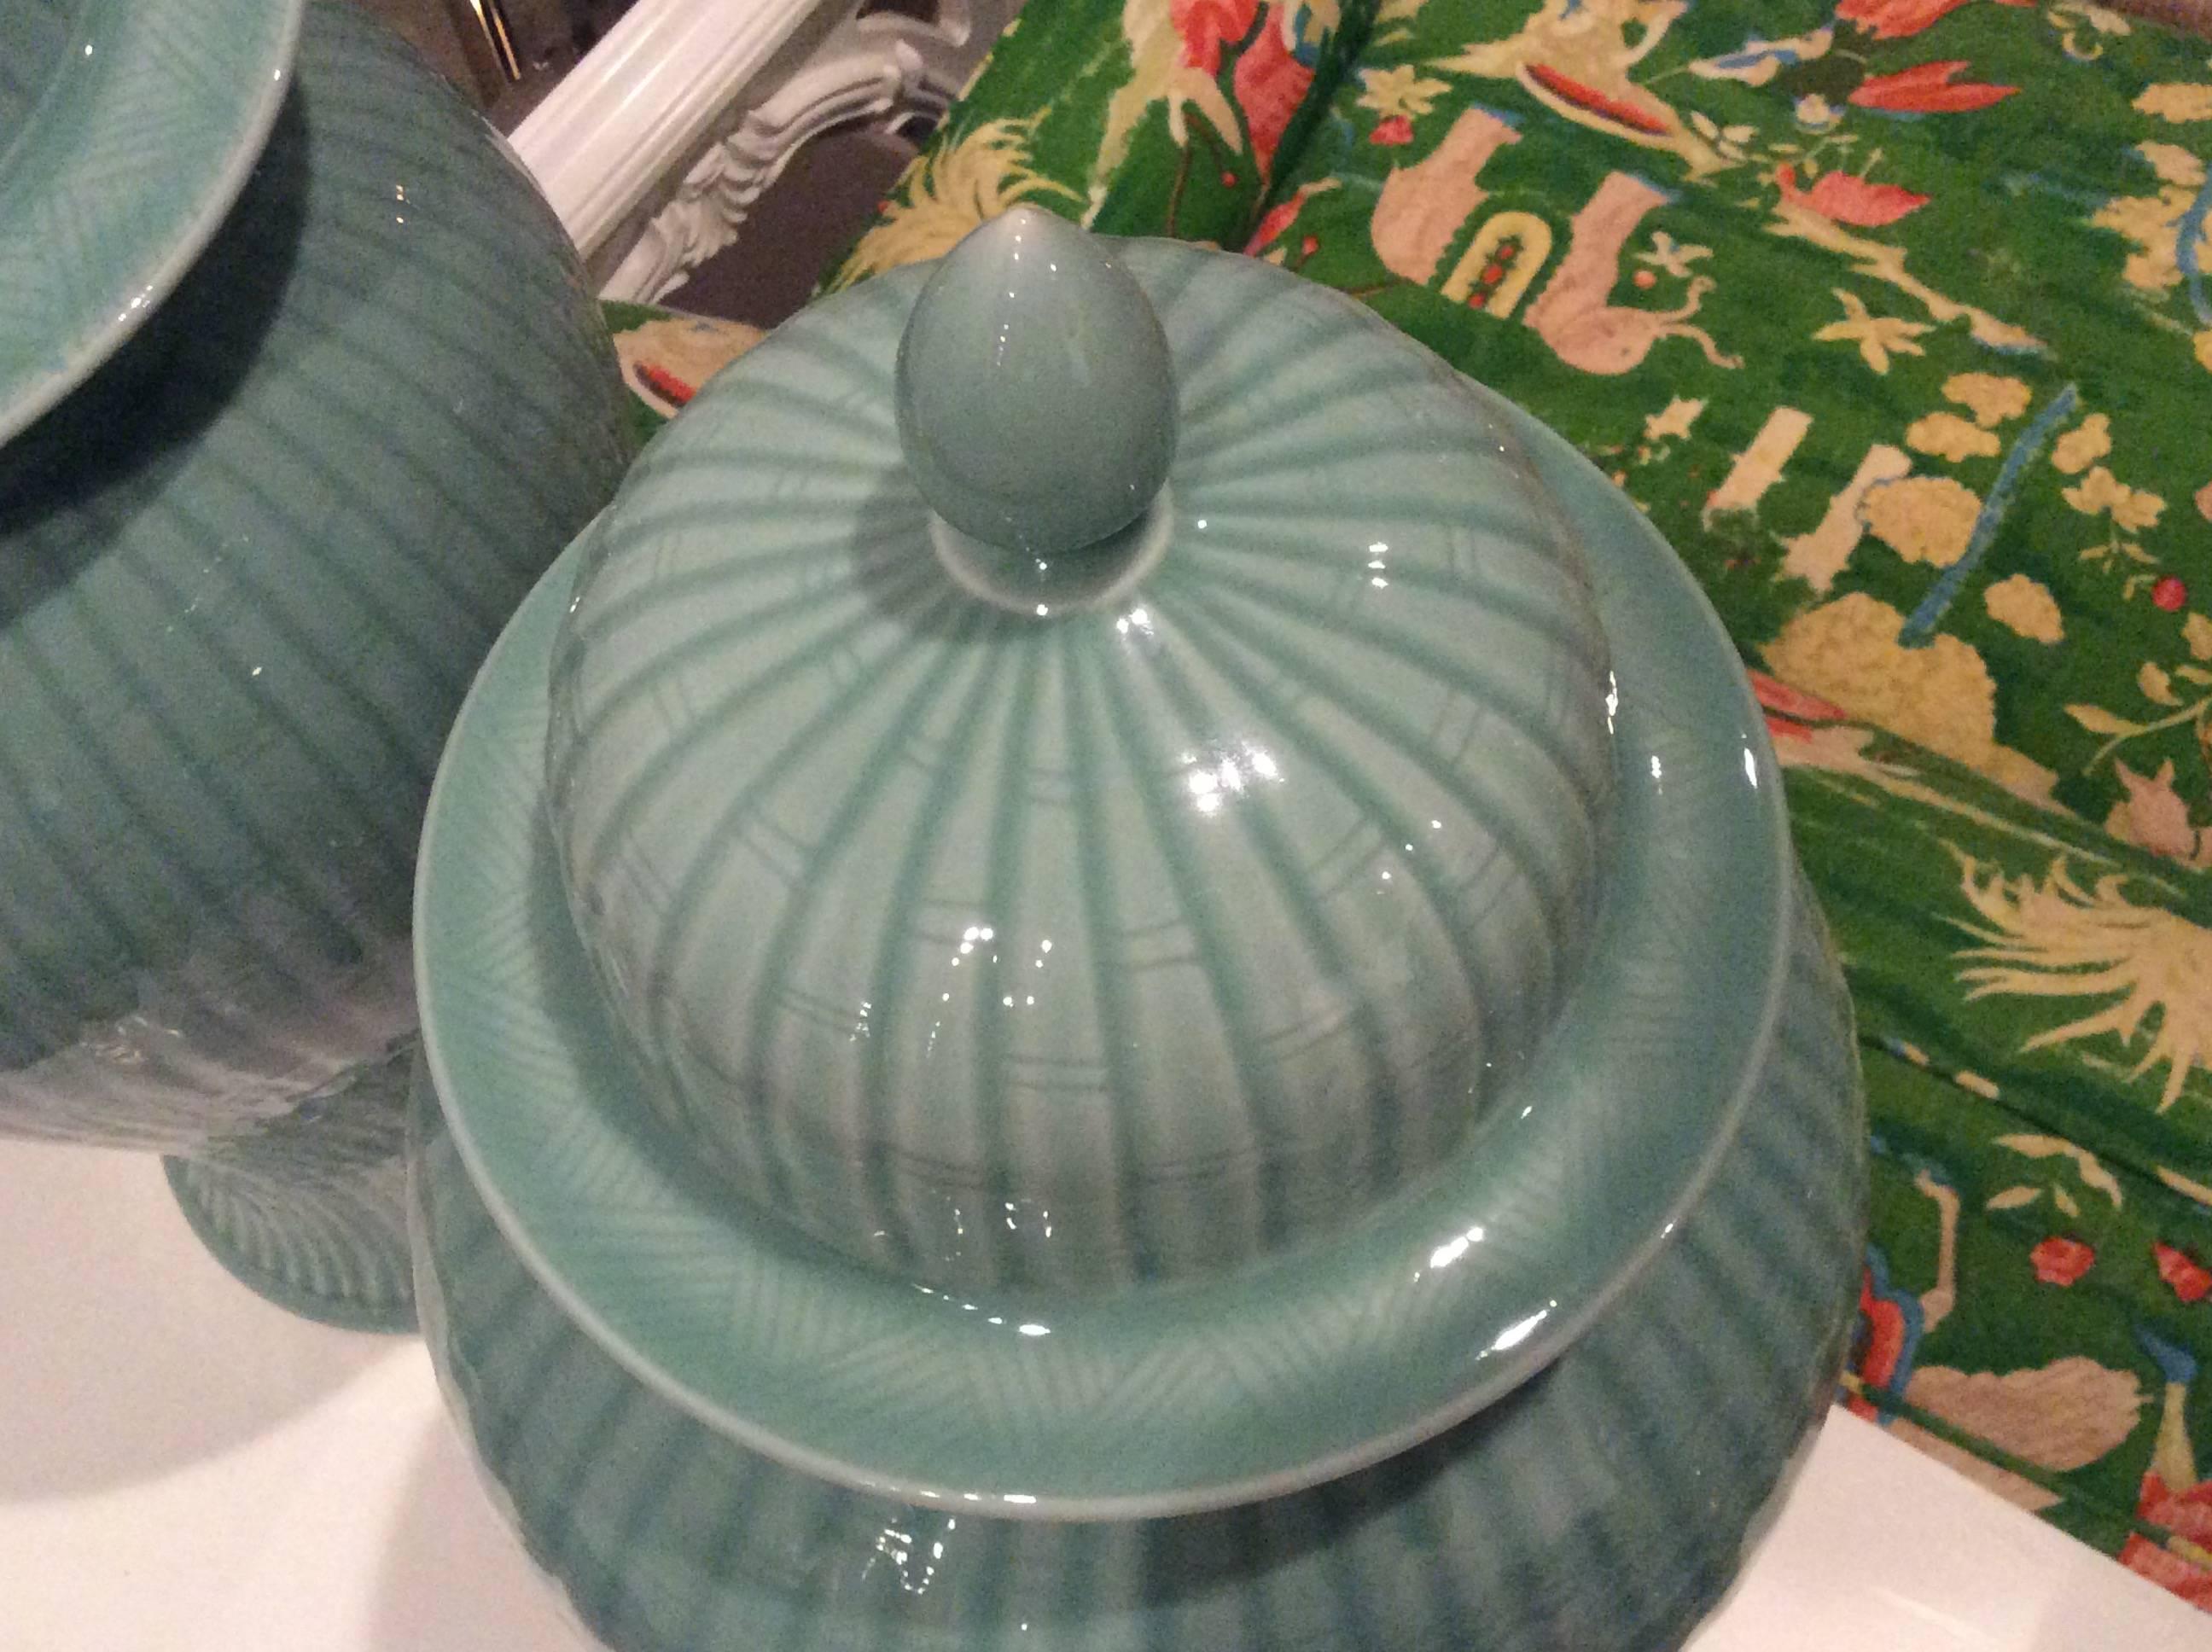 green and white ginger jar